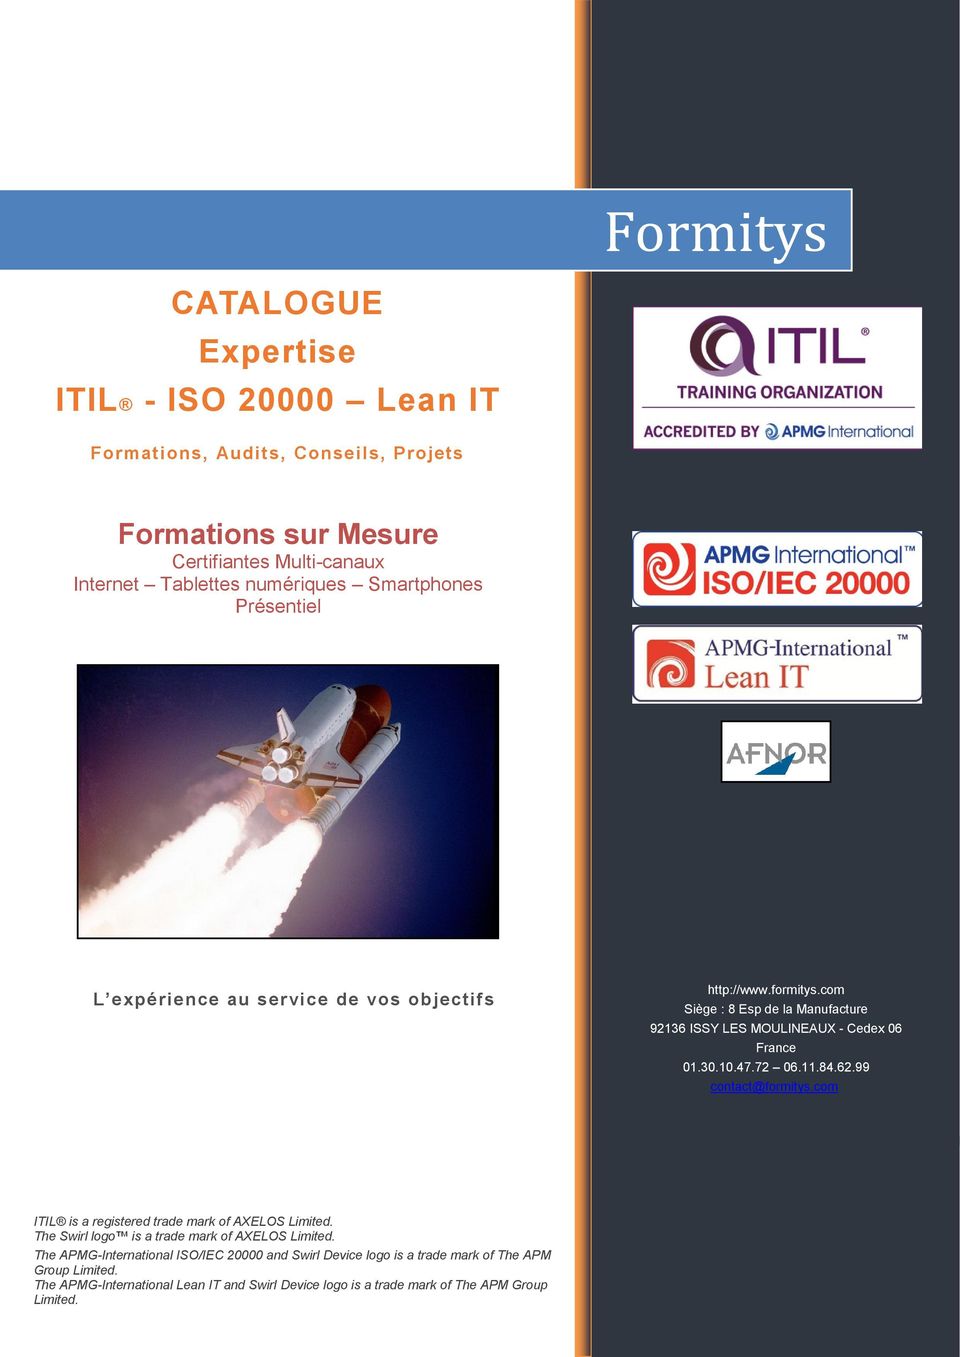 30.10.47.72 Ŕ 06.11.84.62.99 contact@formitys.com ITIL is a registered trade mark of AXELOS Limited. The Swirl logo is a trade mark of AXELOS Limited.